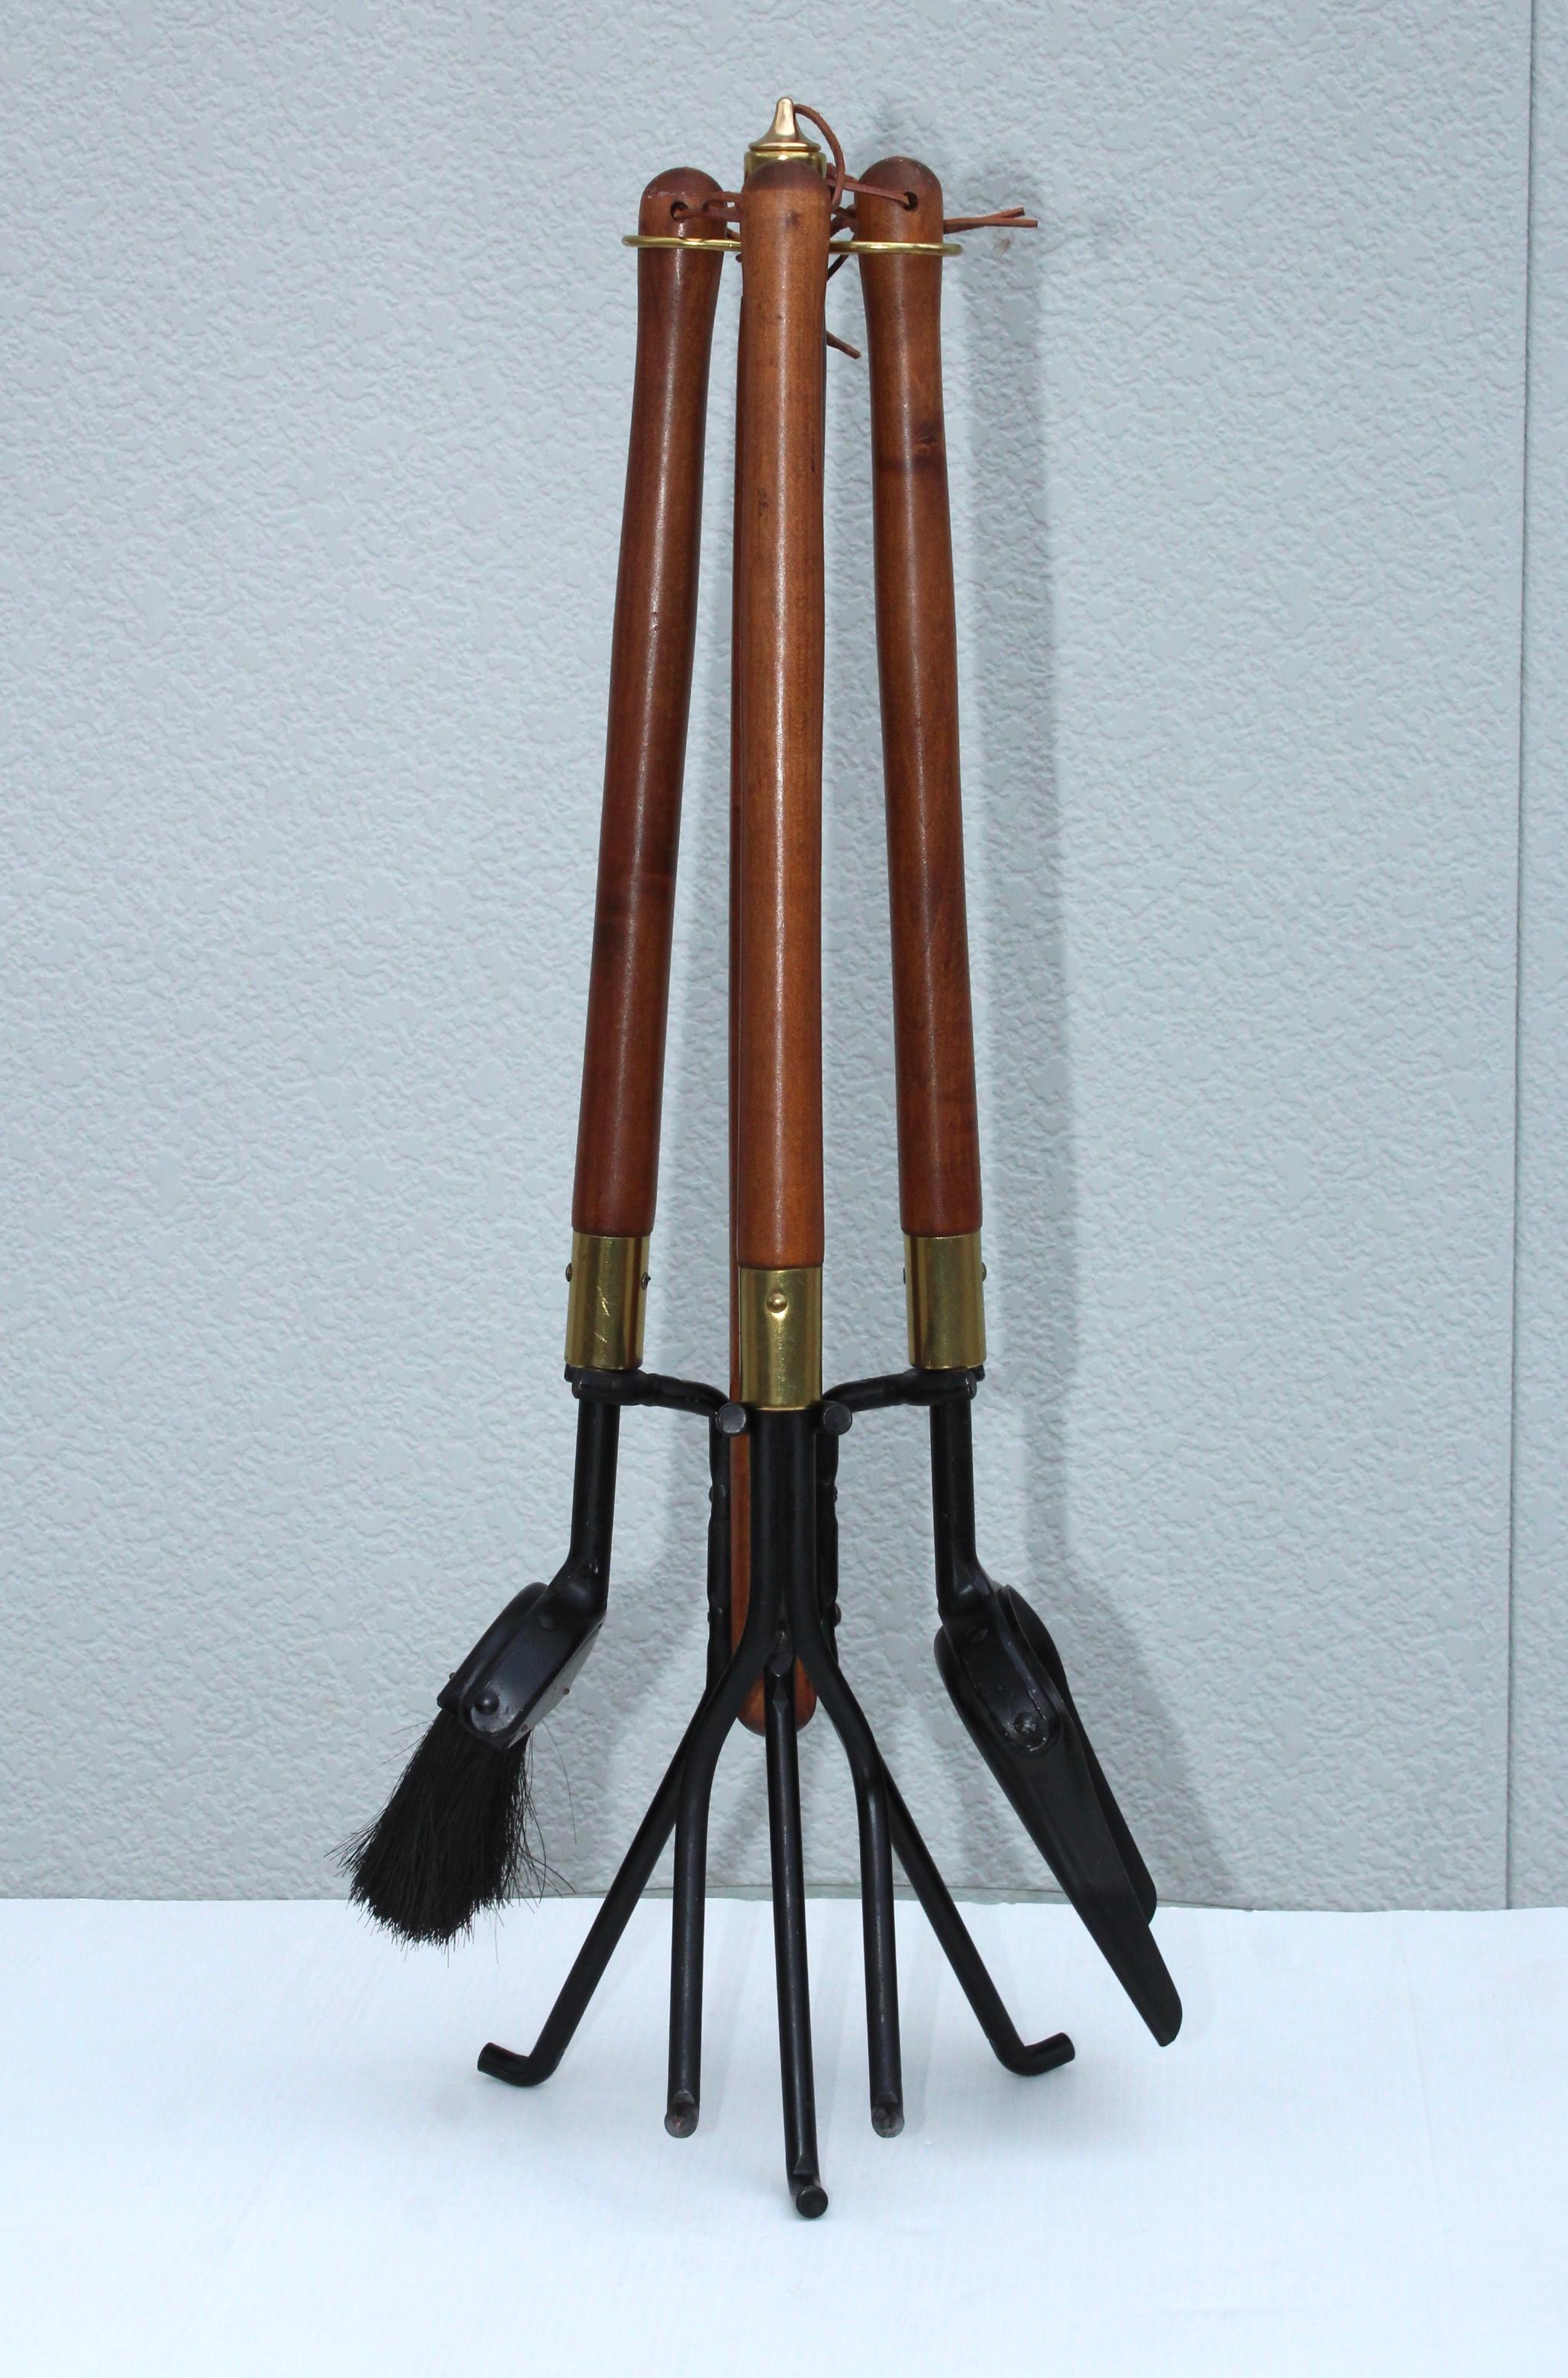 1960s Mid-Century Modern walnut and iron with brass detail fireplace tools by Seymour.